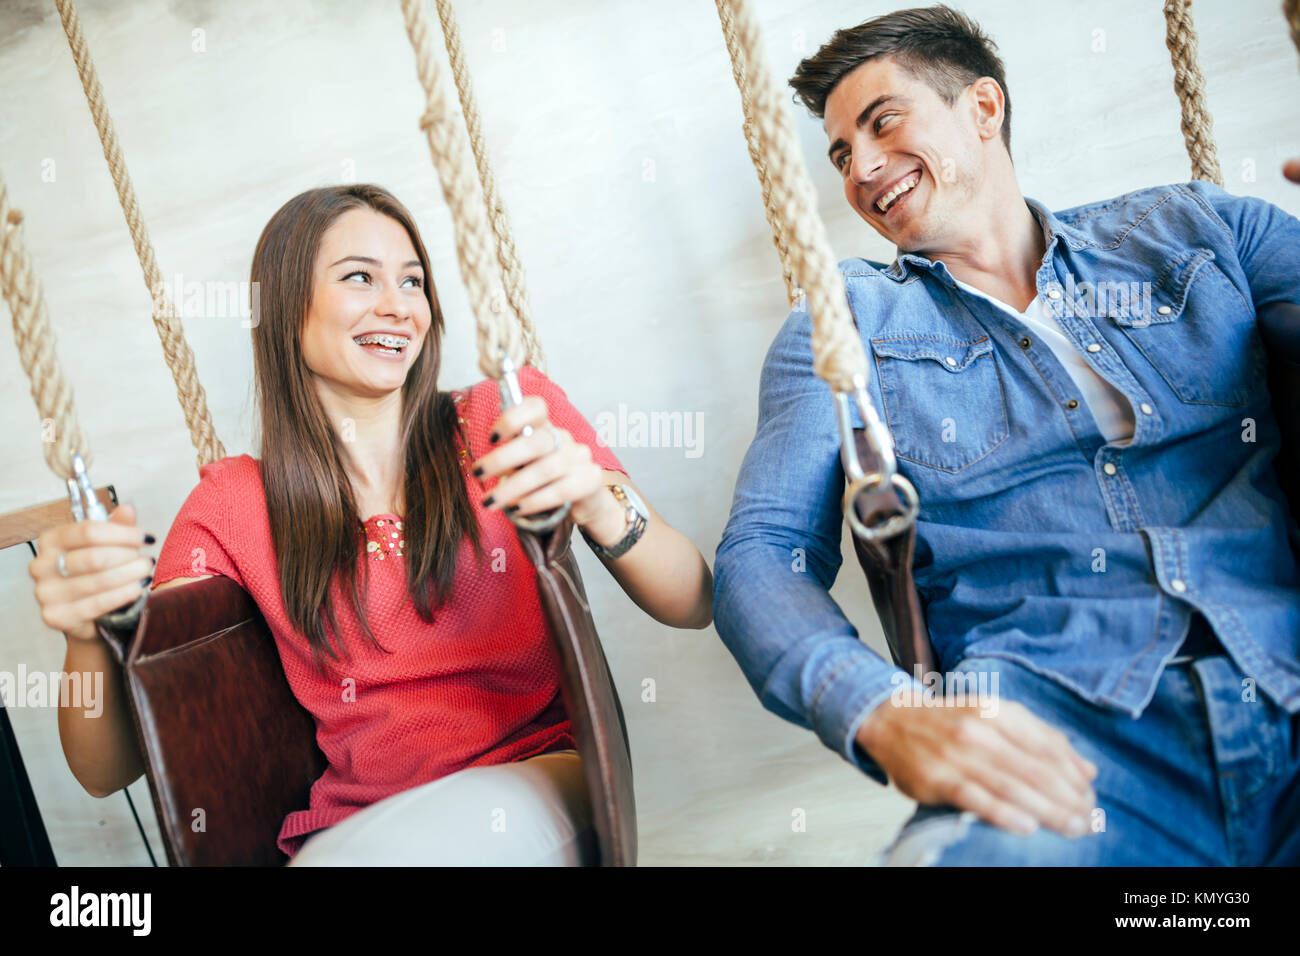 Young couple relaxing in swing Banque D'Images